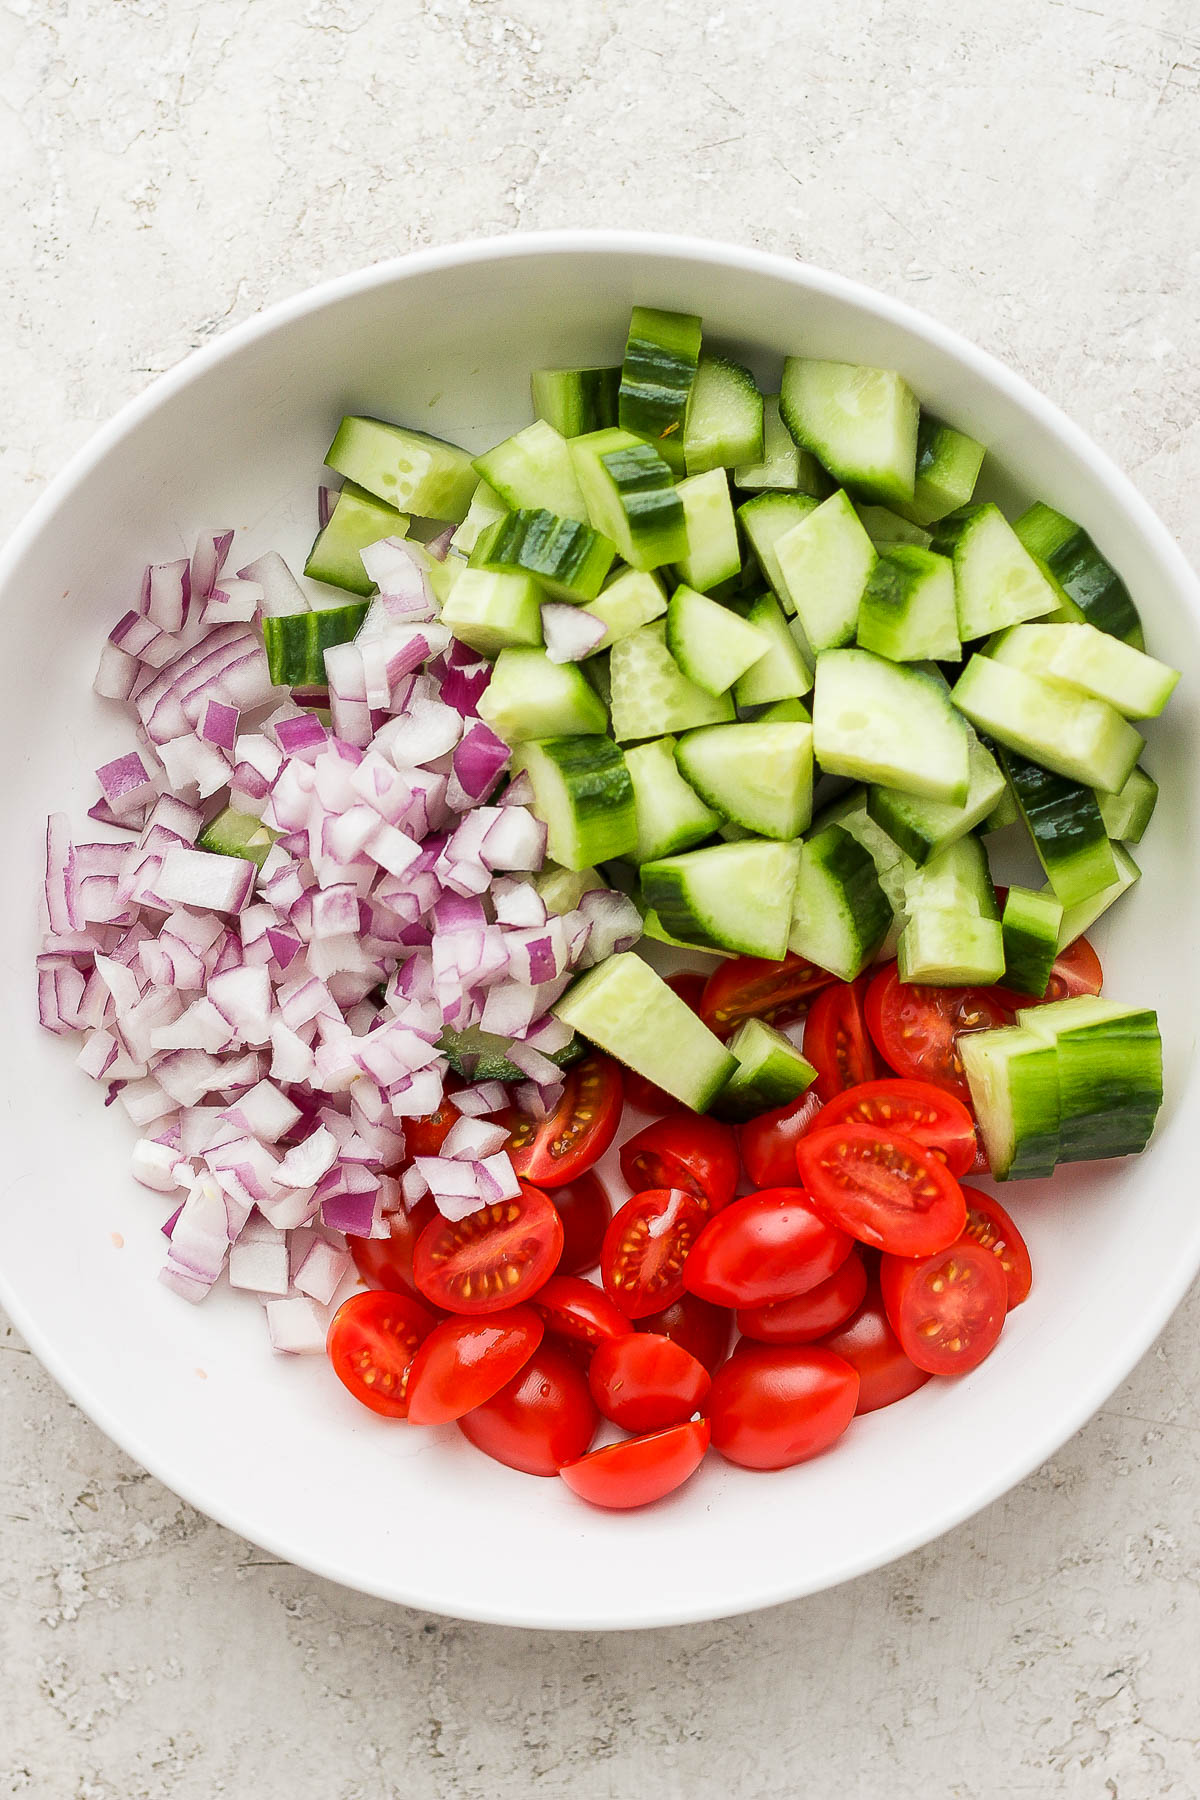 Fresh tomatoes, cucumbers, and red onion on a white plate.